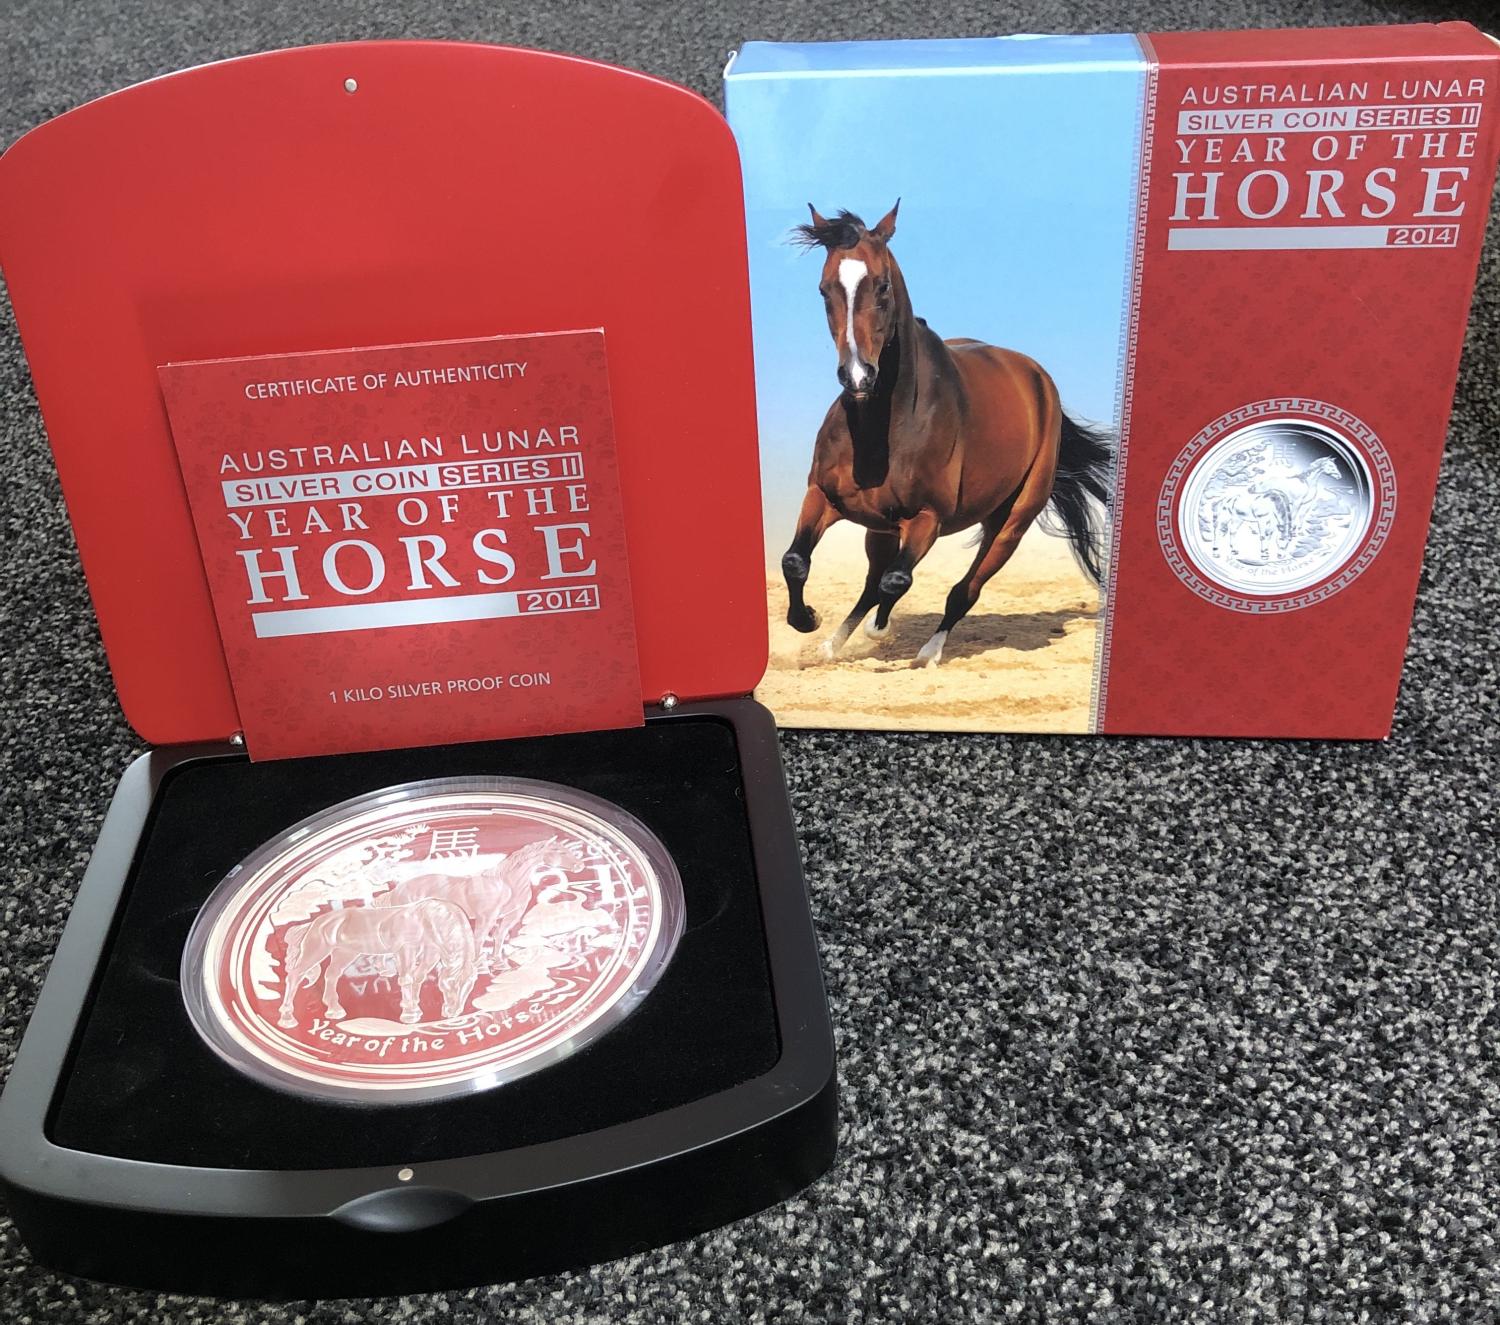 Thumbnail for 2014 One Kilo Year of the Horse Proof Coin